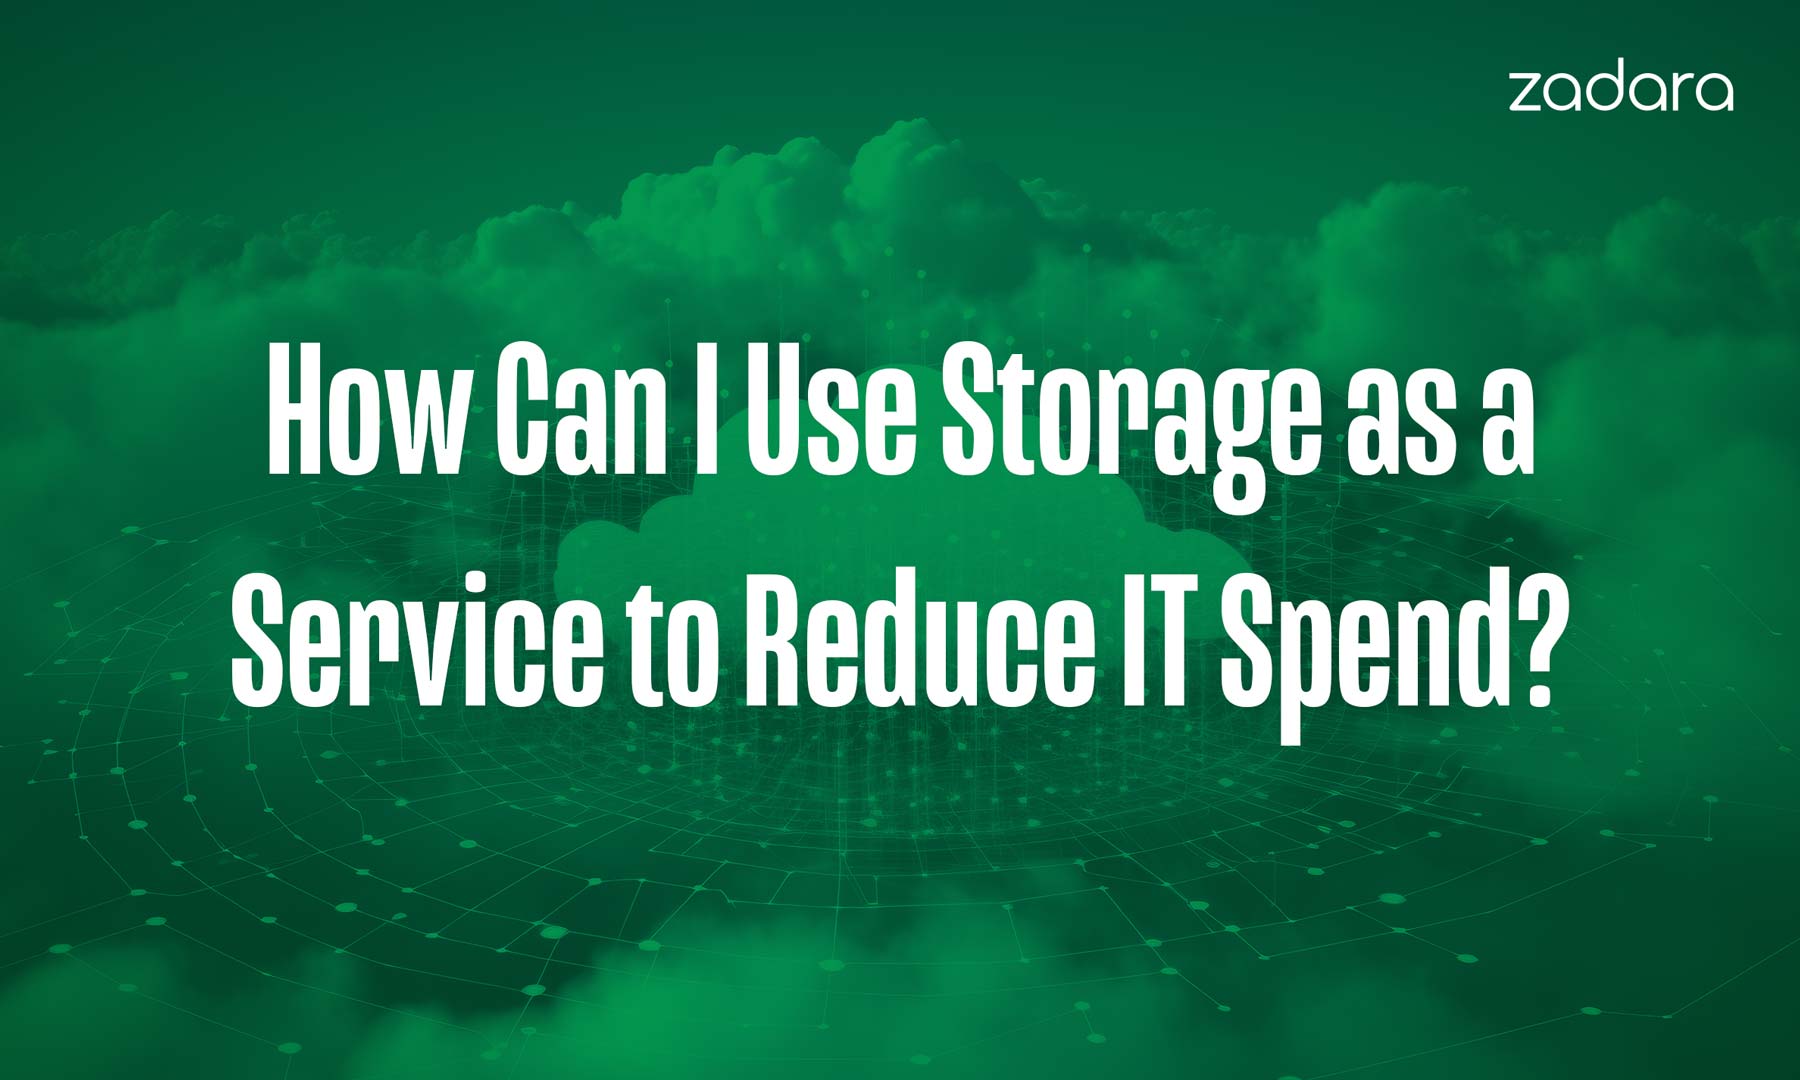 How Can I Use Storage as a Service to Reduce IT Spend?